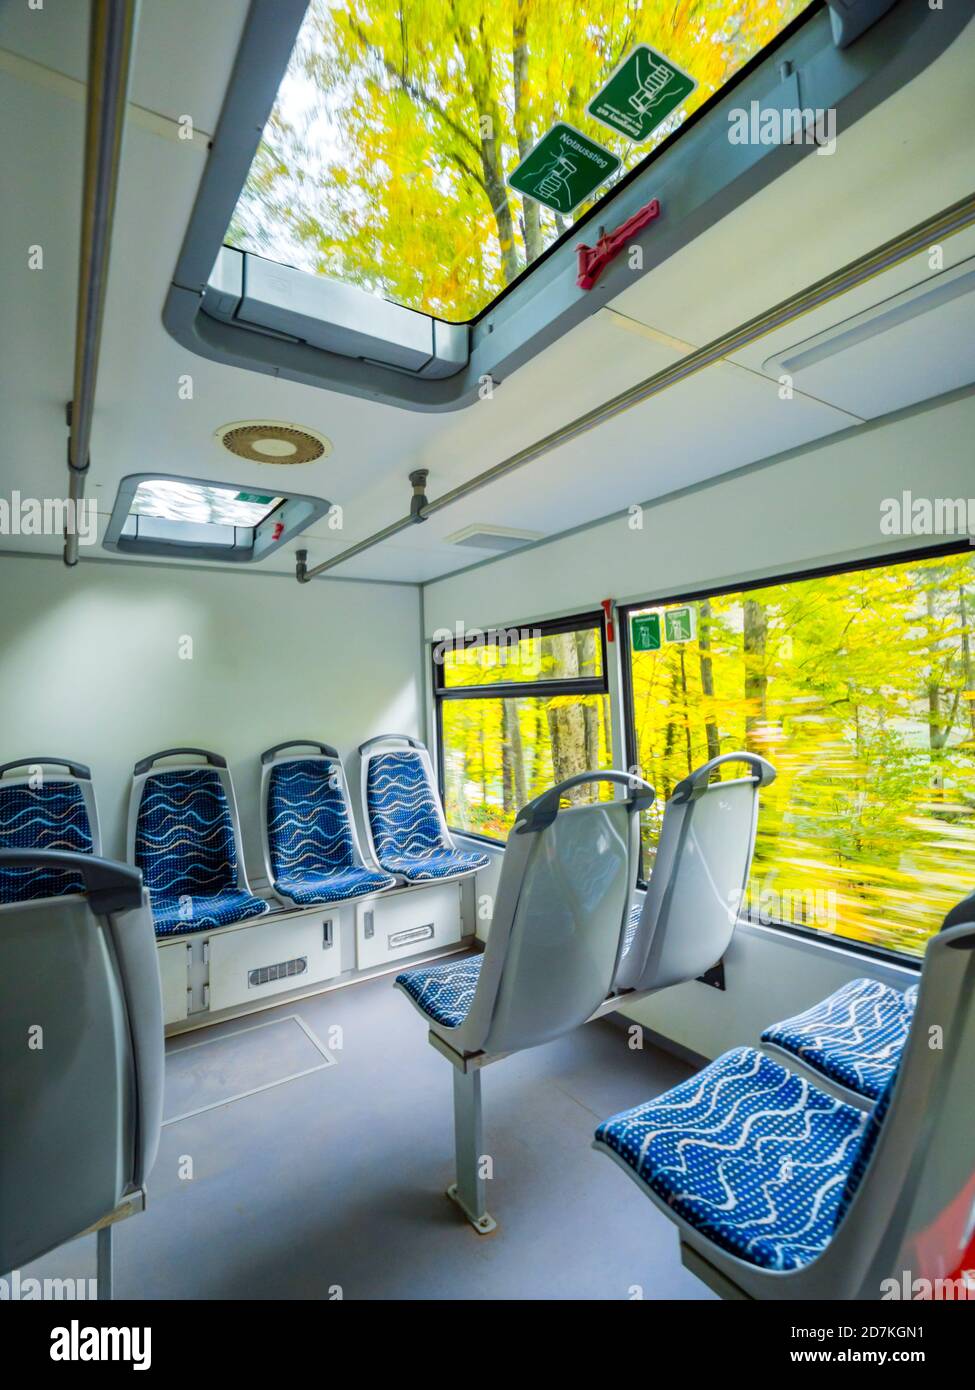 Empty seats seating seat in train vehicle cabin interior inside blurry exterior passing by portraying speed in Plitvice lakes in Croatia Europe Stock Photo